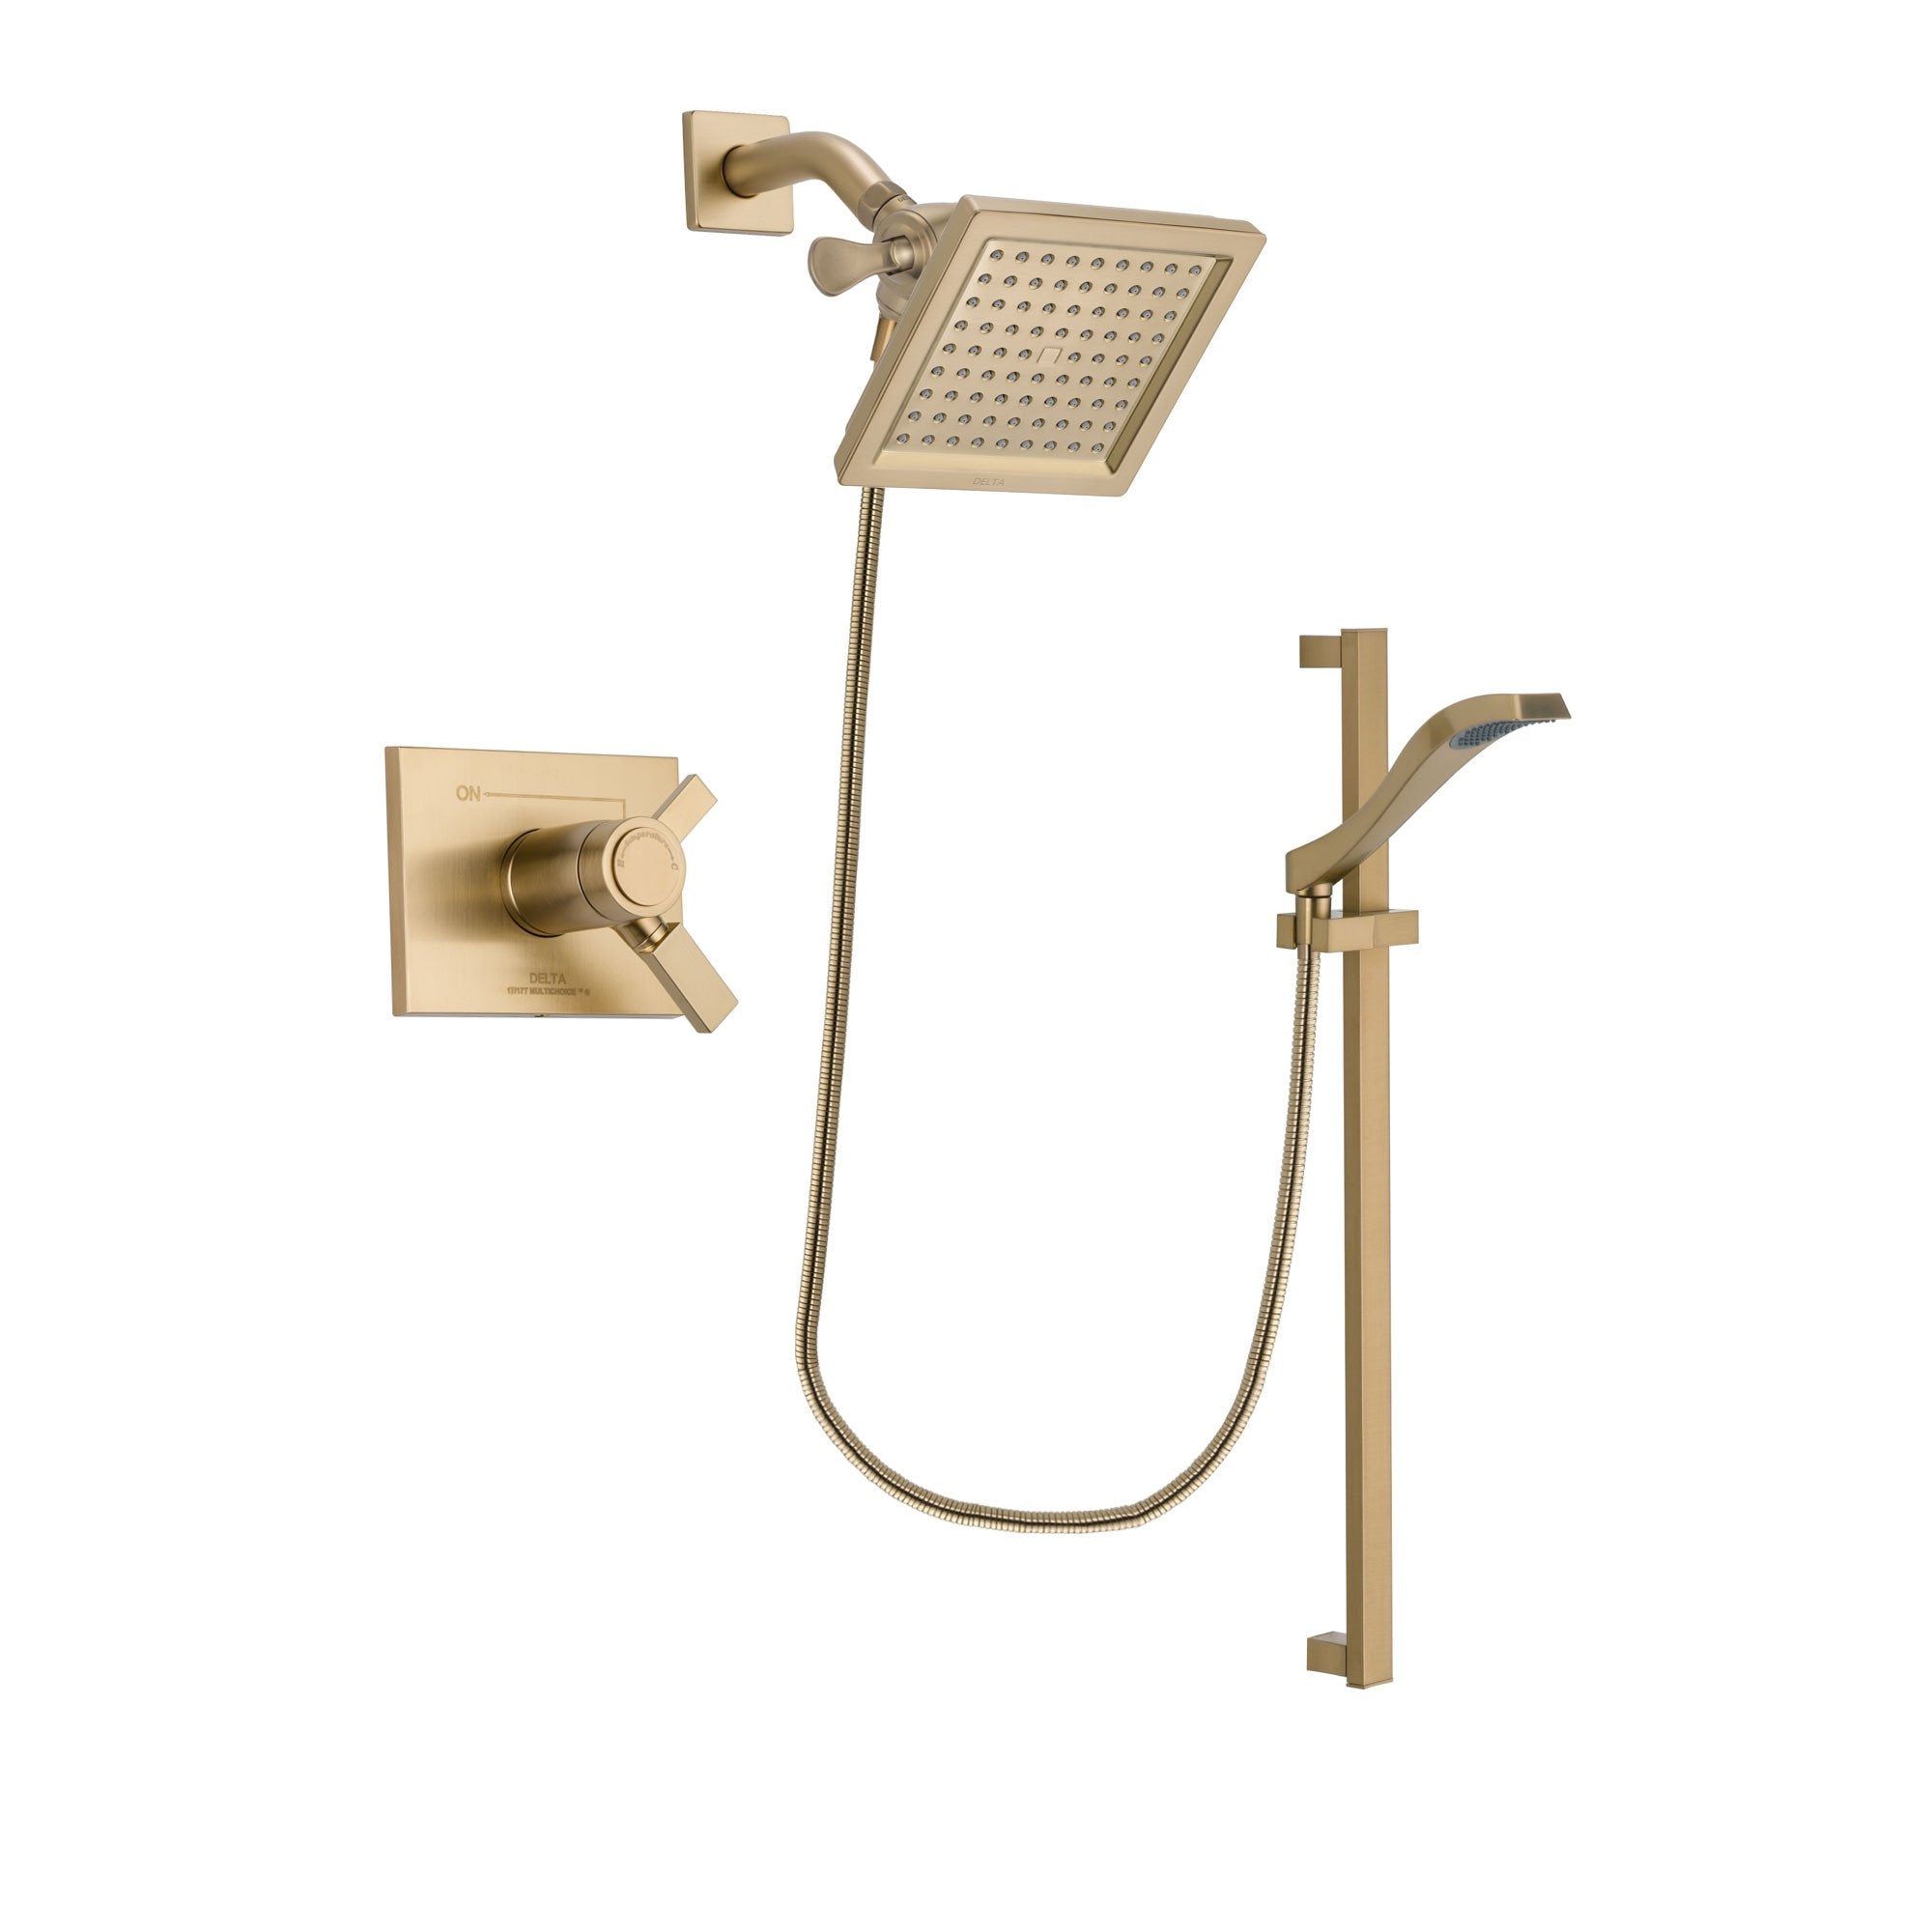 Delta Vero Champagne Bronze Finish Thermostatic Shower Faucet System Package with 6.5-inch Square Rain Showerhead and Modern Handheld Shower Spray with Slide Bar Includes Rough-in Valve DSP3924V